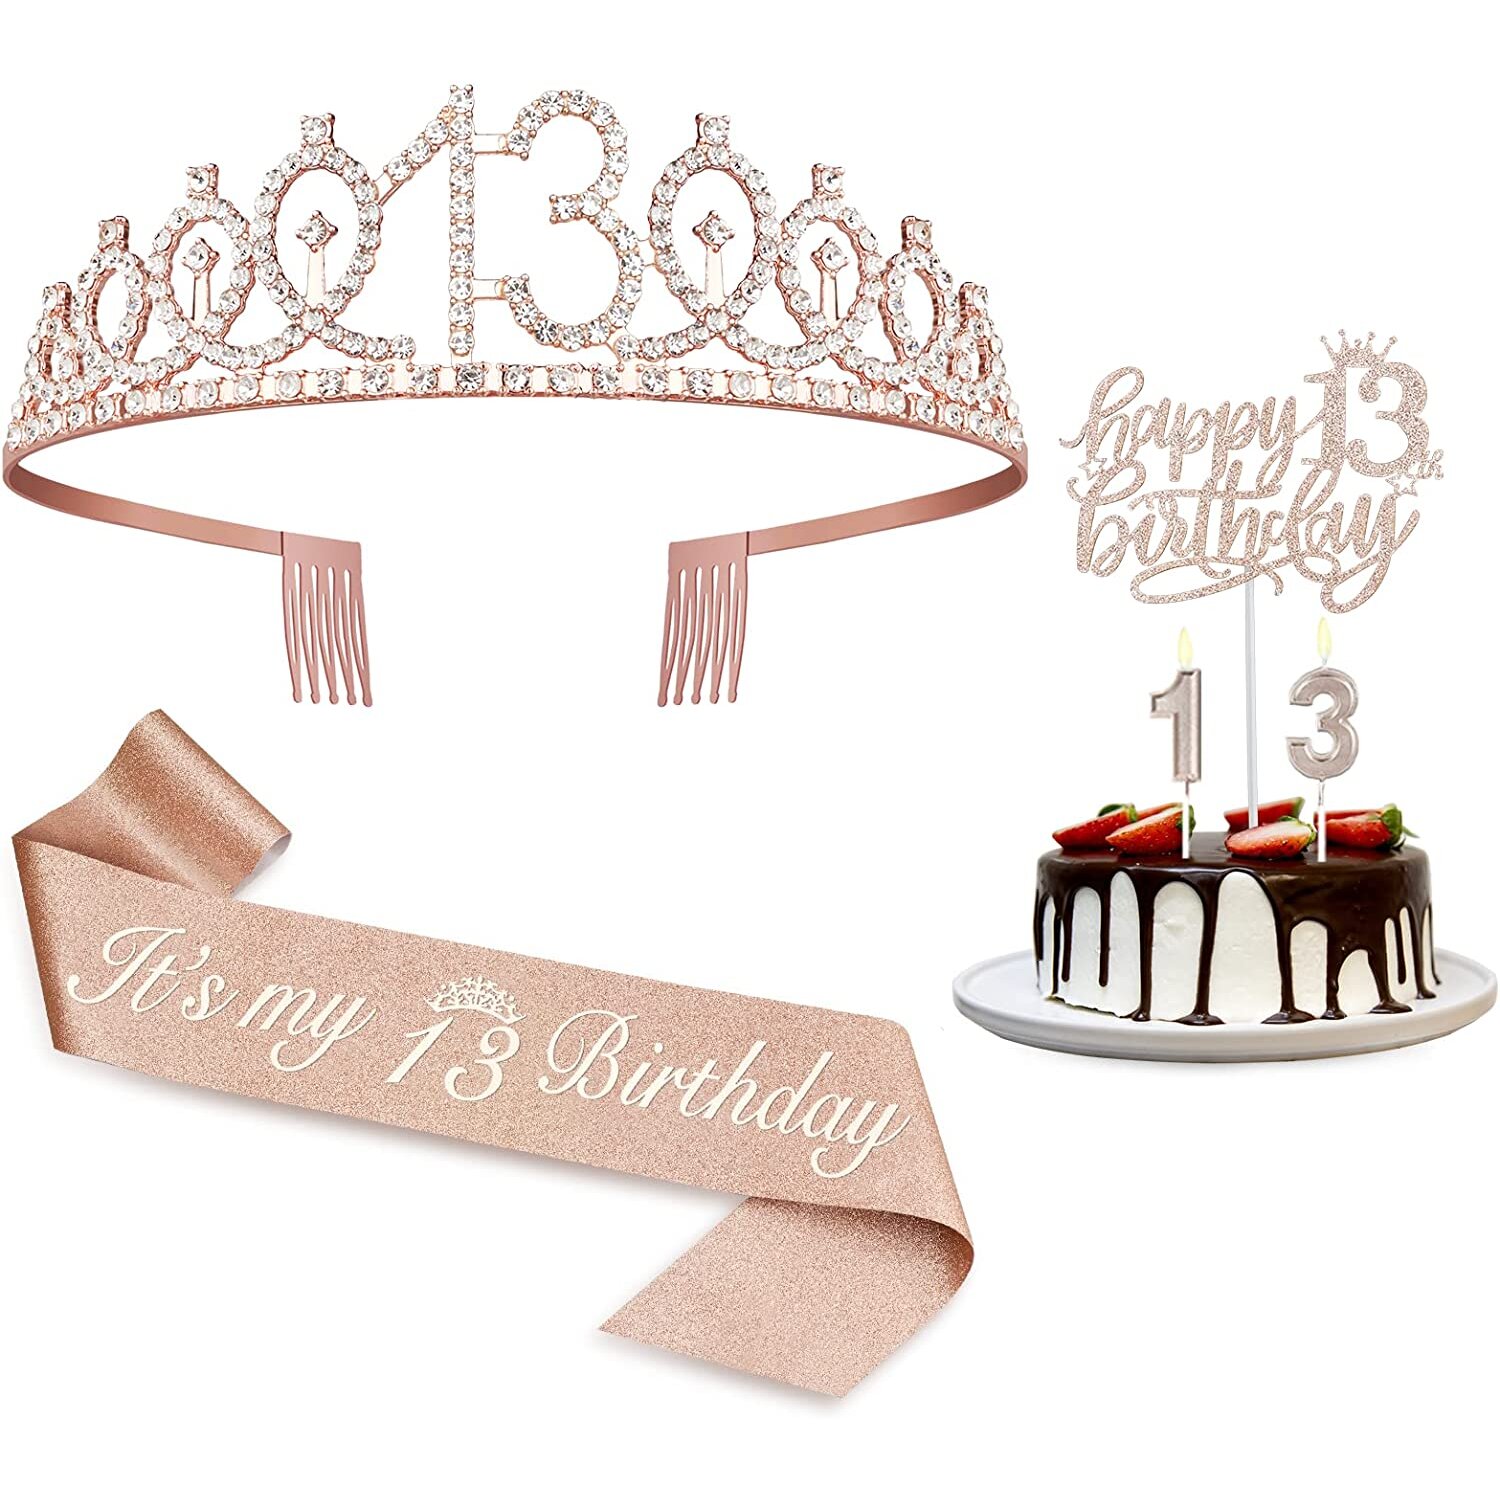 Amosking Rose Gold 13th Birthday Decorations for Girls,13th Birthday Sash,Crown/Tiara,Candles,Cake Toppers,13th Birthday Gifts...